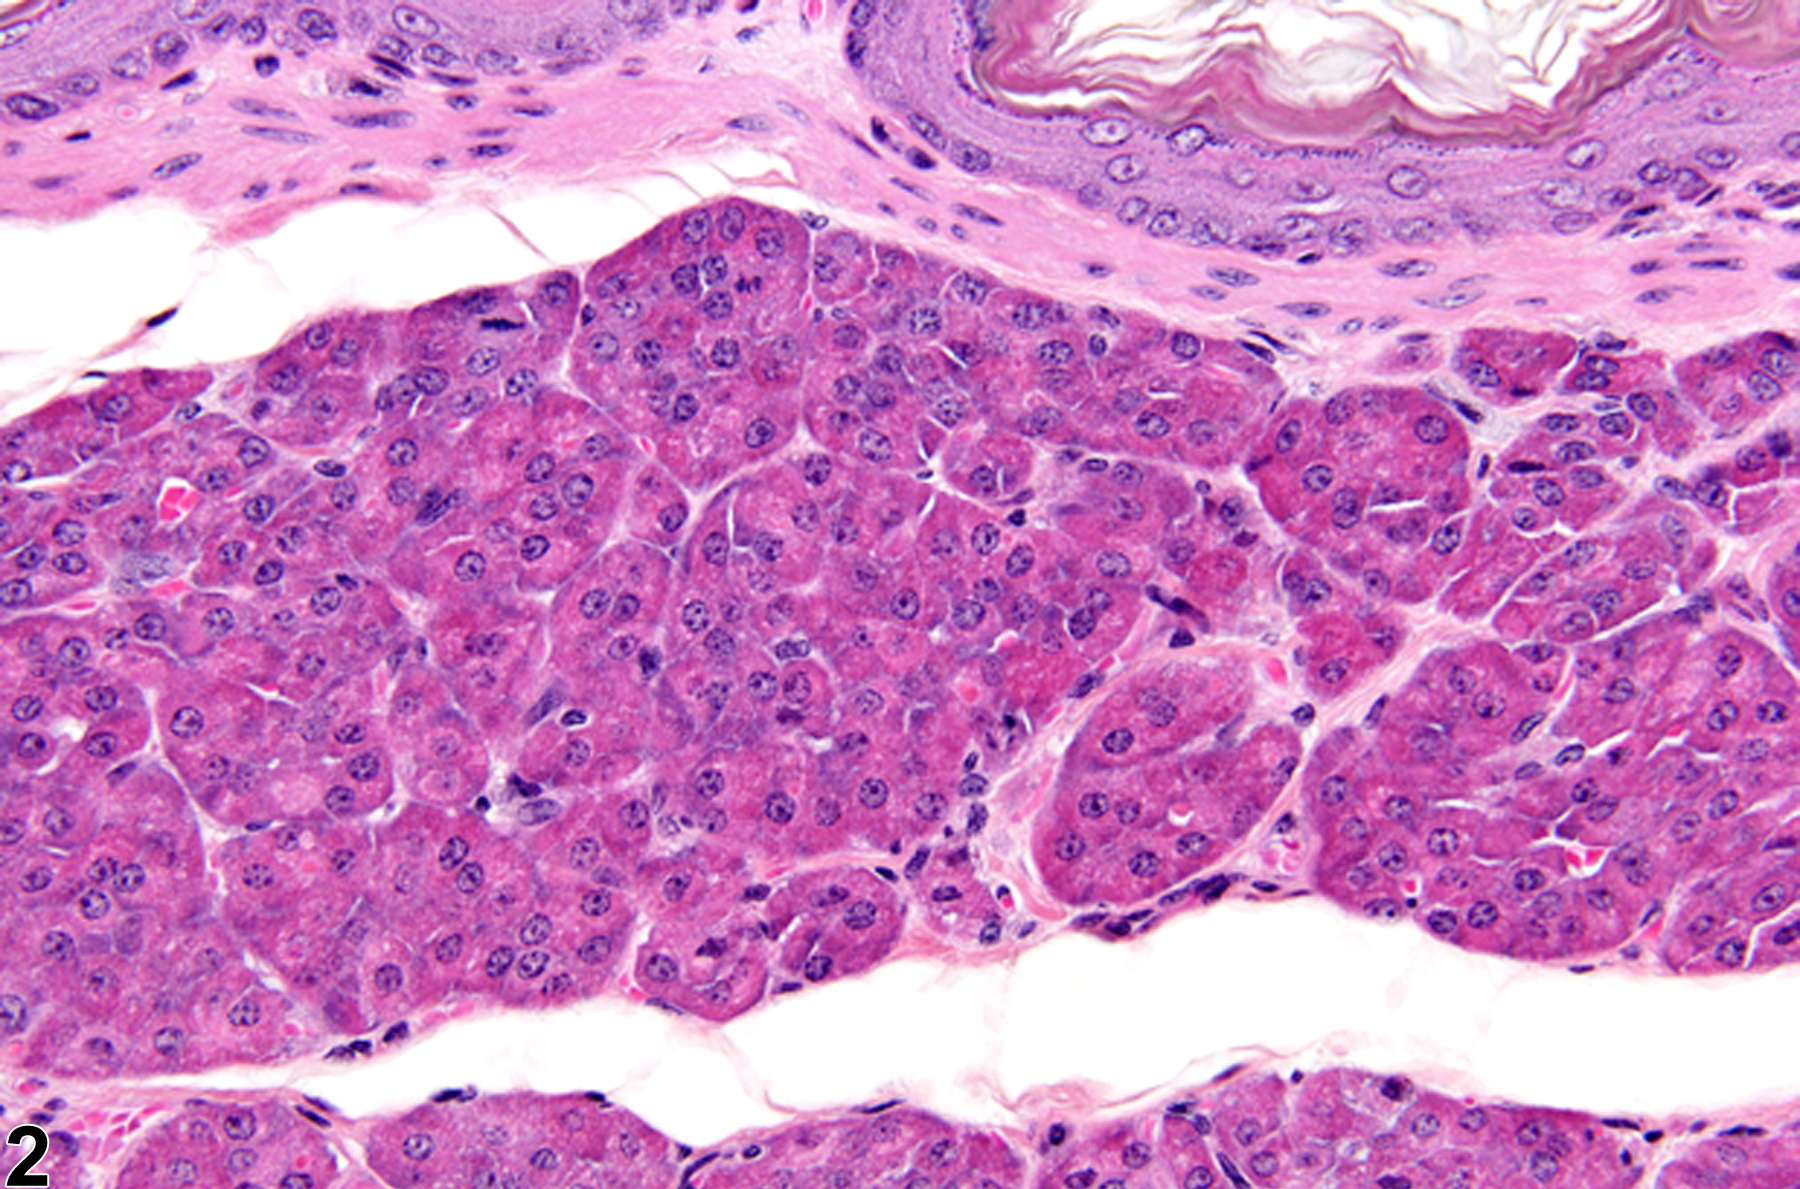 Image of ectopic tissue in the forestomach from a female B6C3F1 mouse in a chronic study